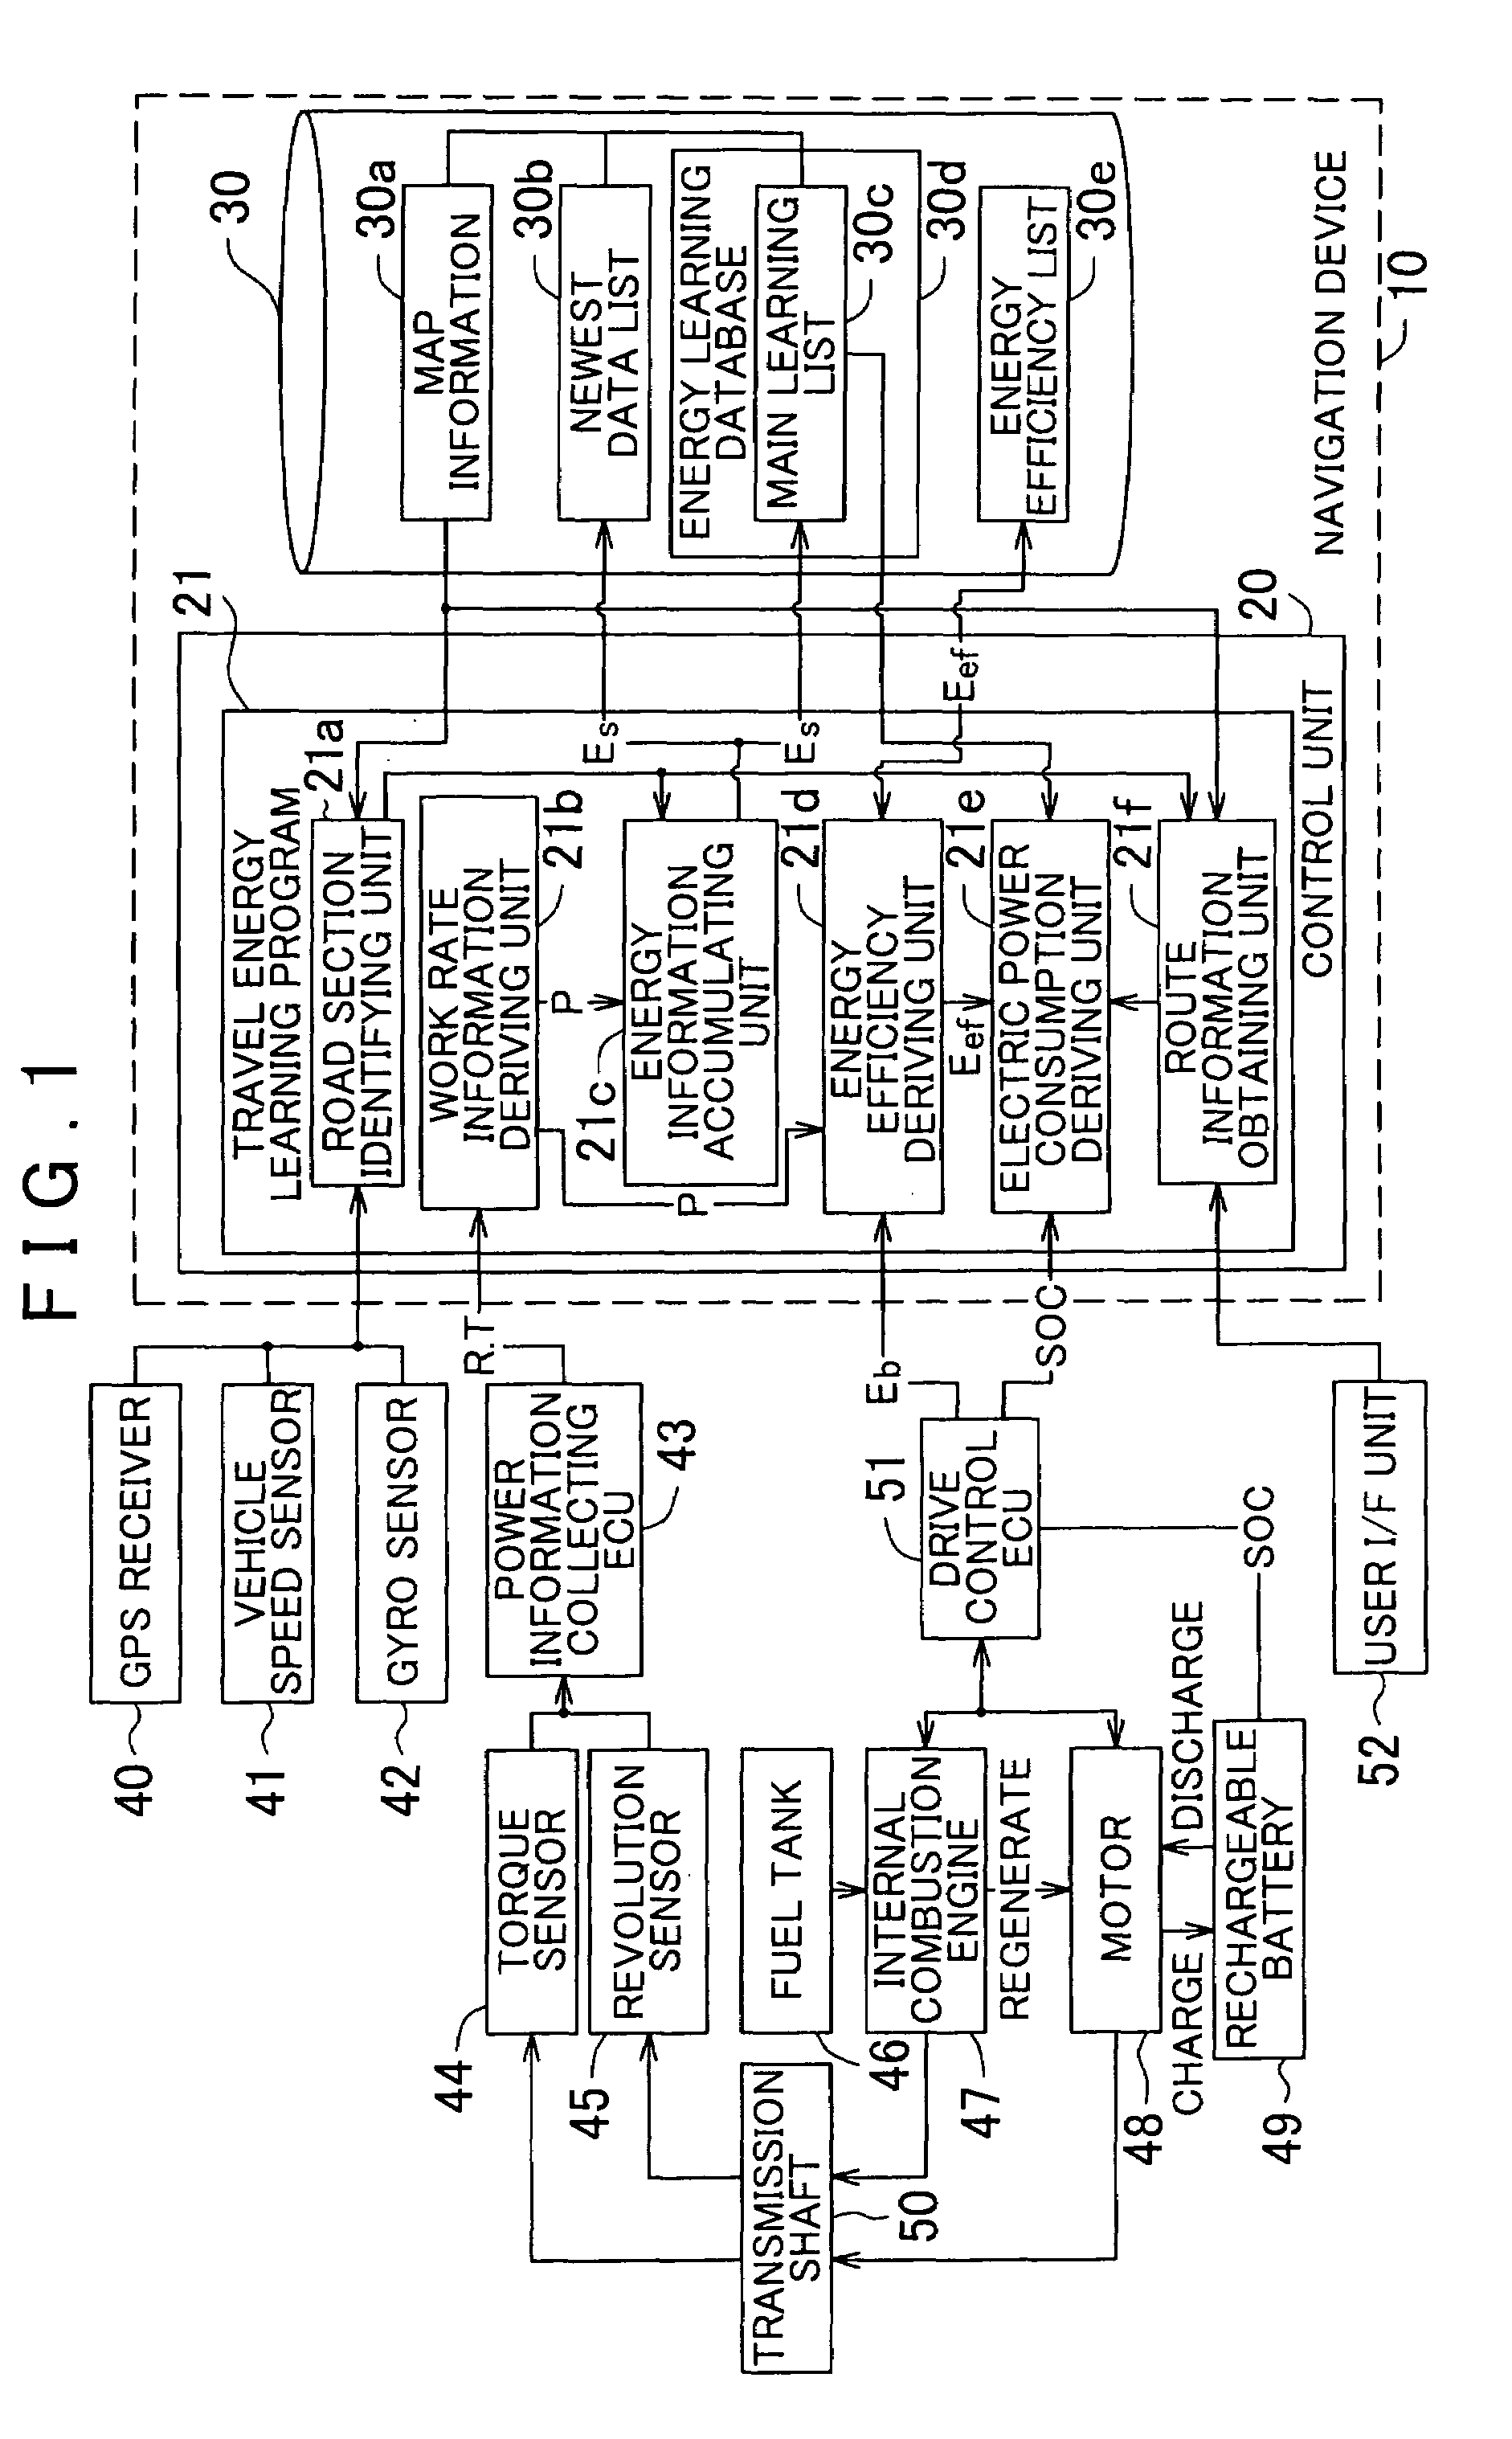 Travel energy learning device, and method